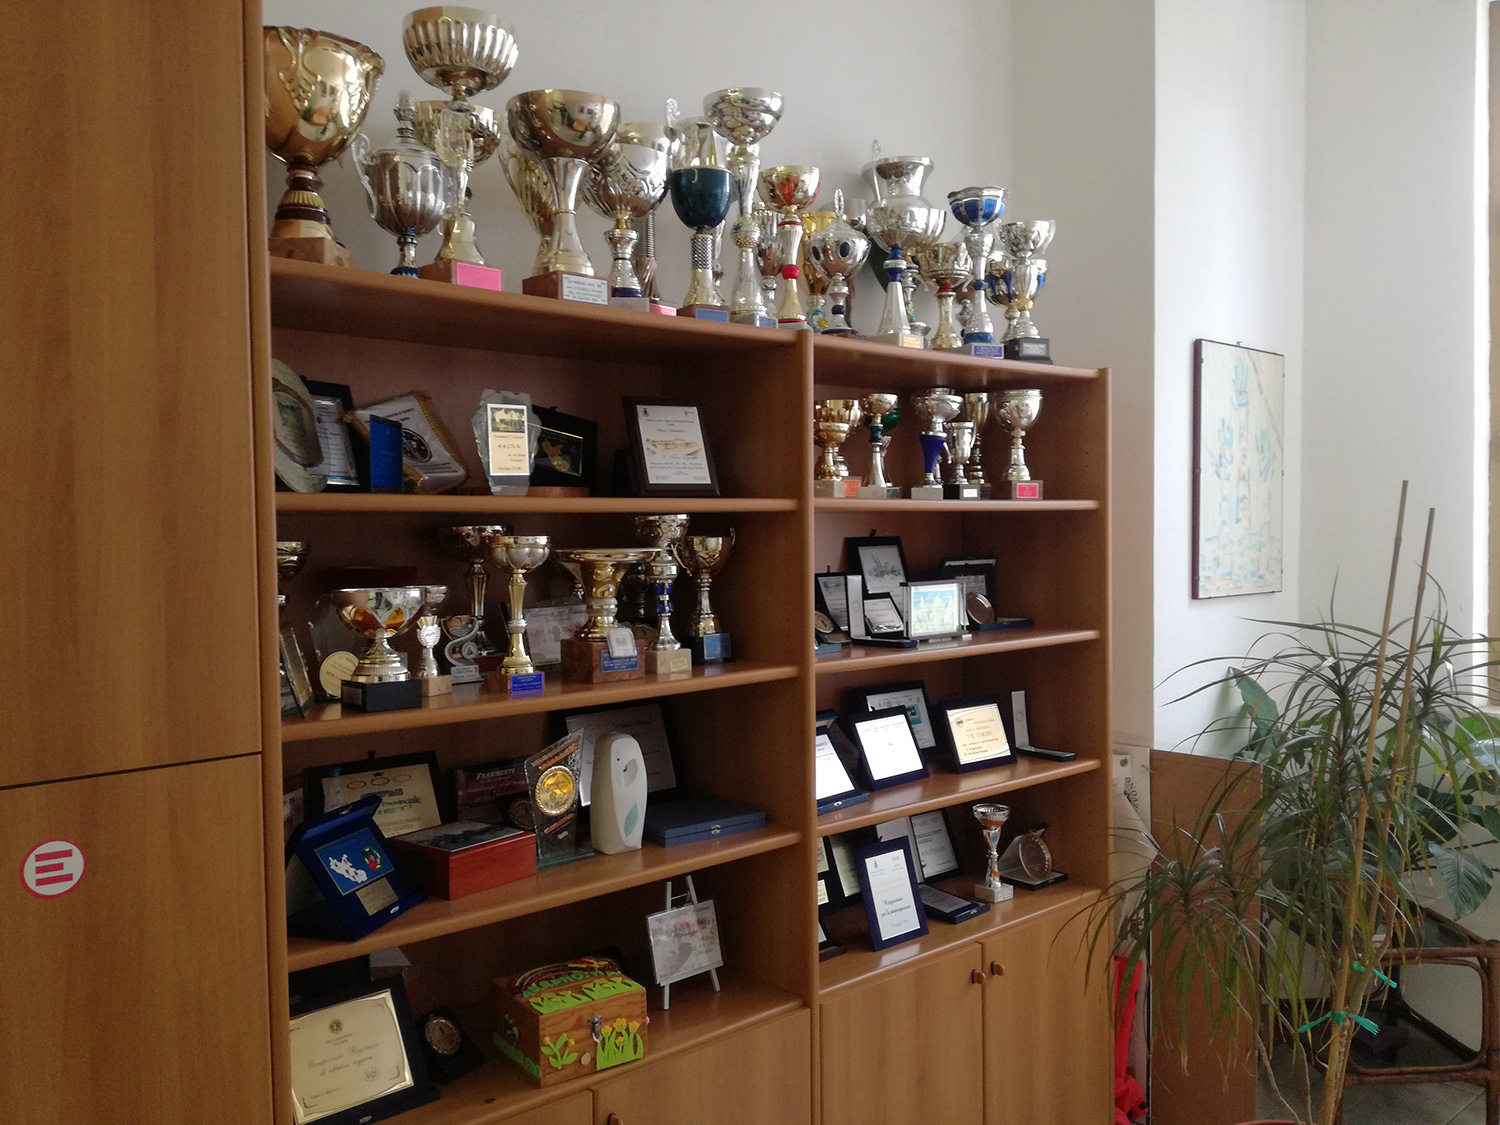 Trophy cabinet of Assproha athletes: many victories